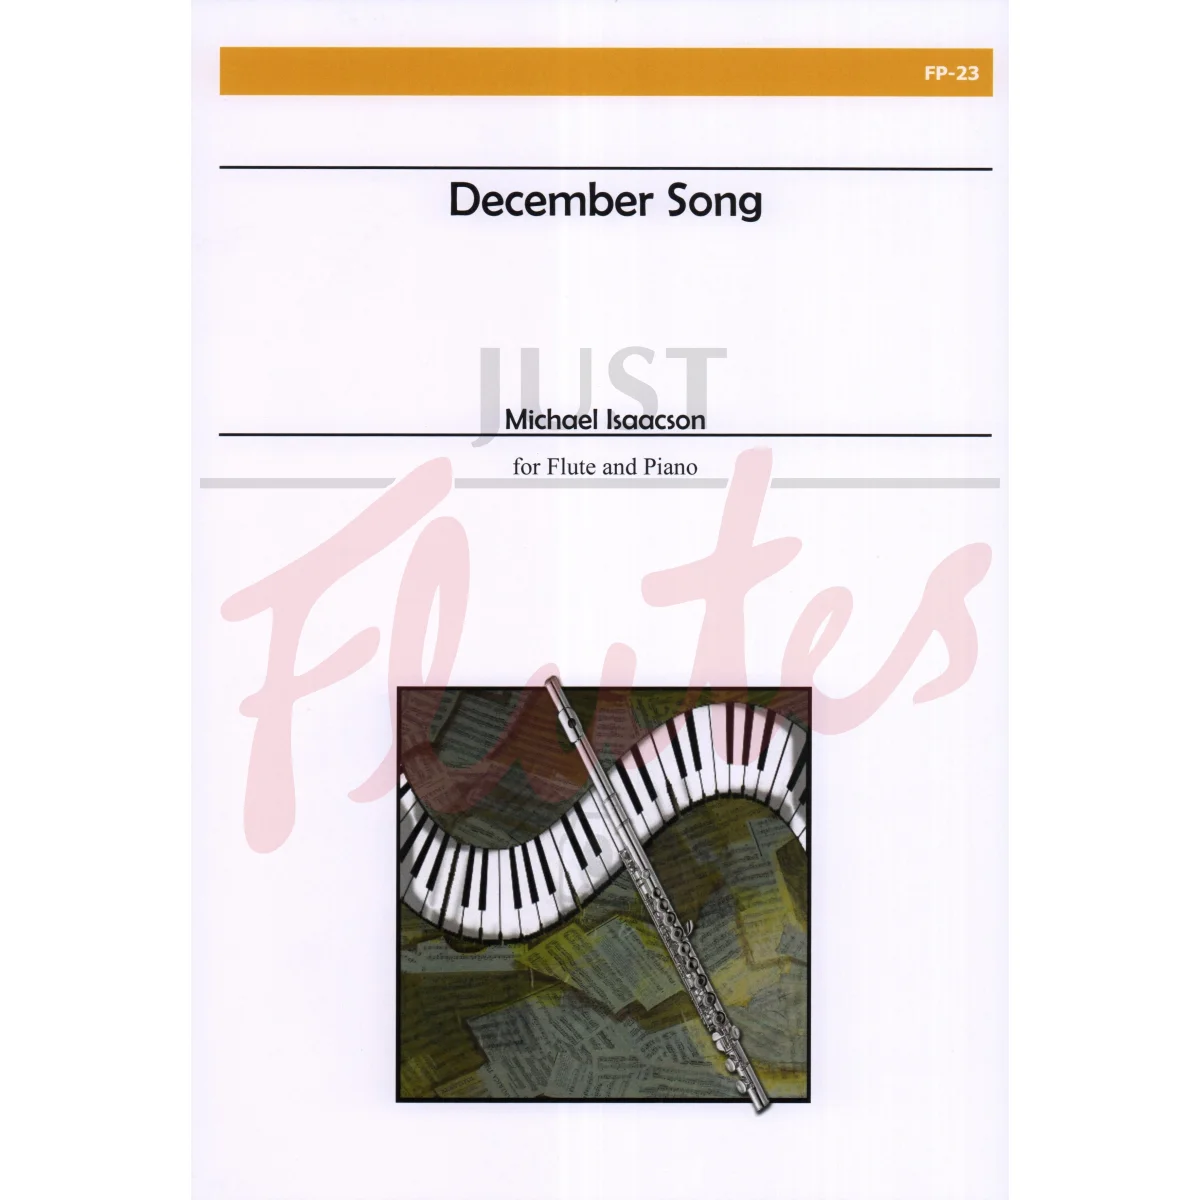 December Song for Flute and Piano